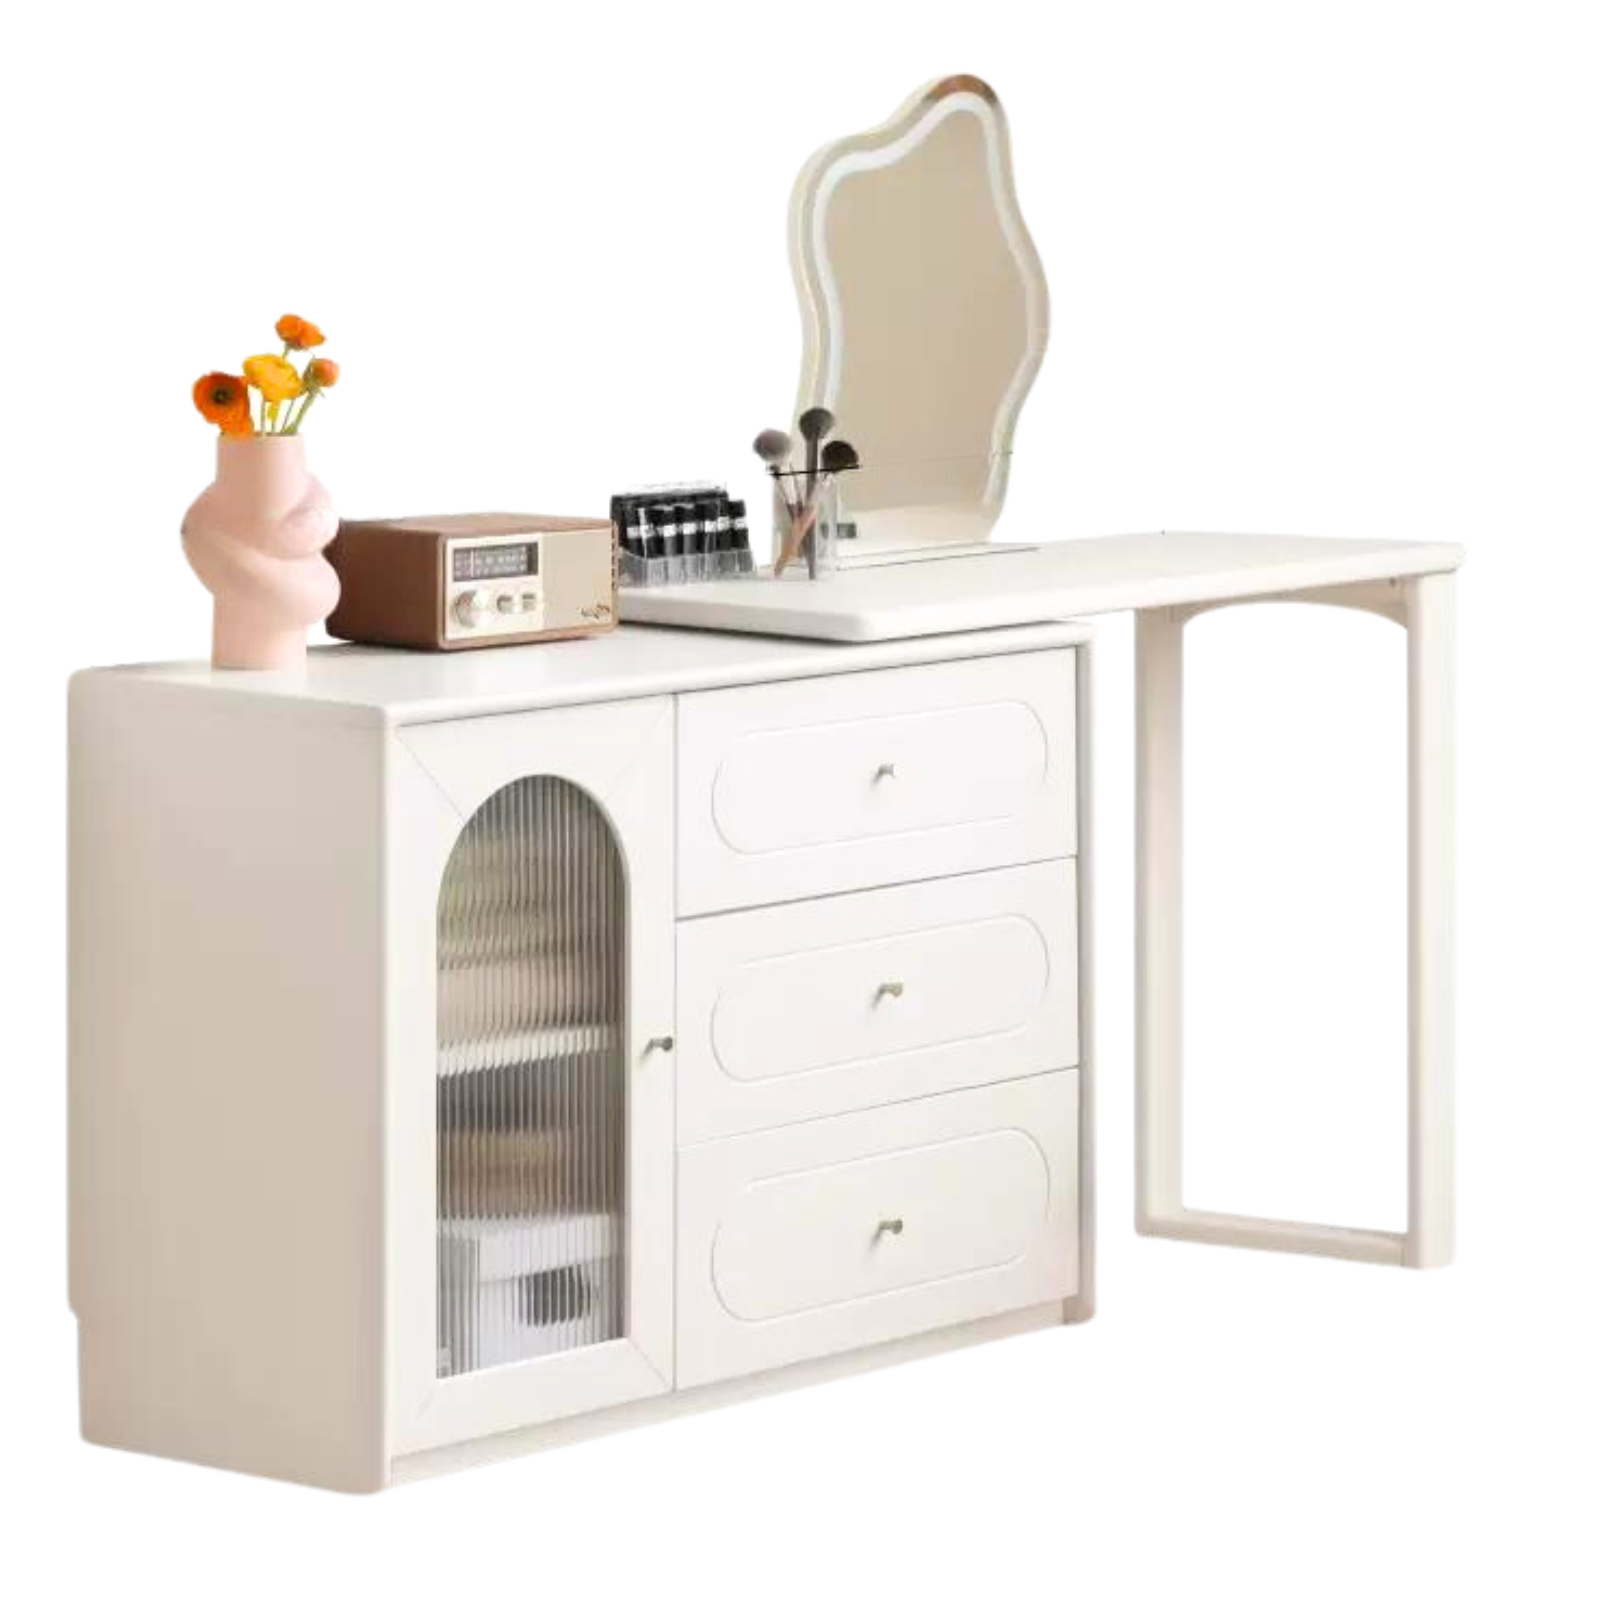 Poplar solid wood dressing table and cabinet integrated French cream style retractable -